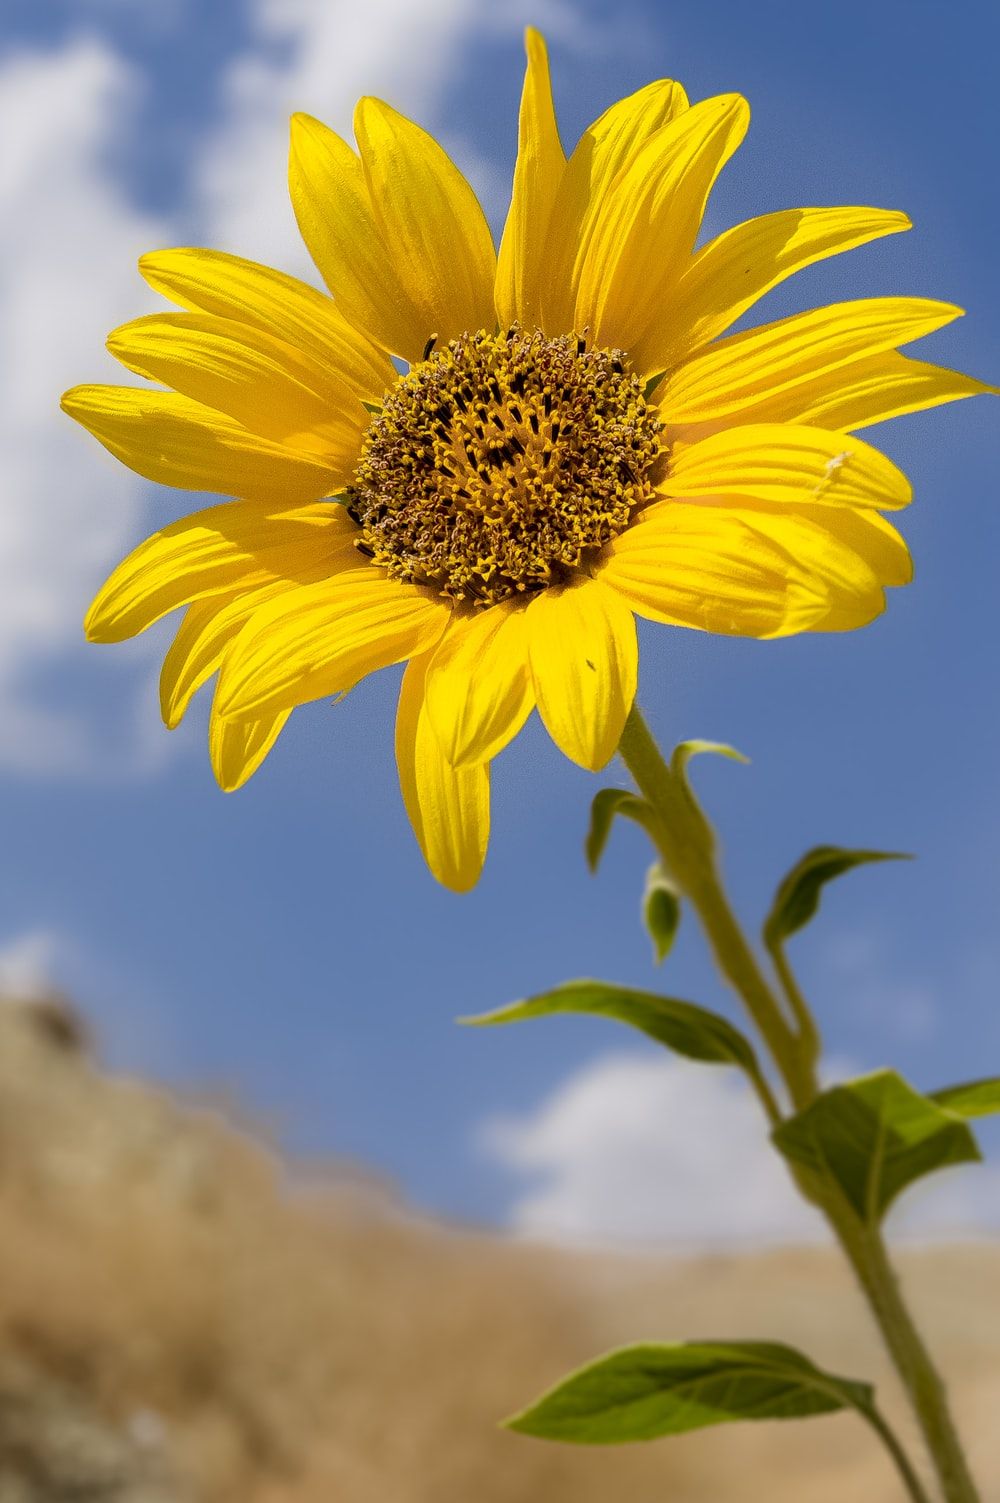 Sunflower Background Image: Download HD Background